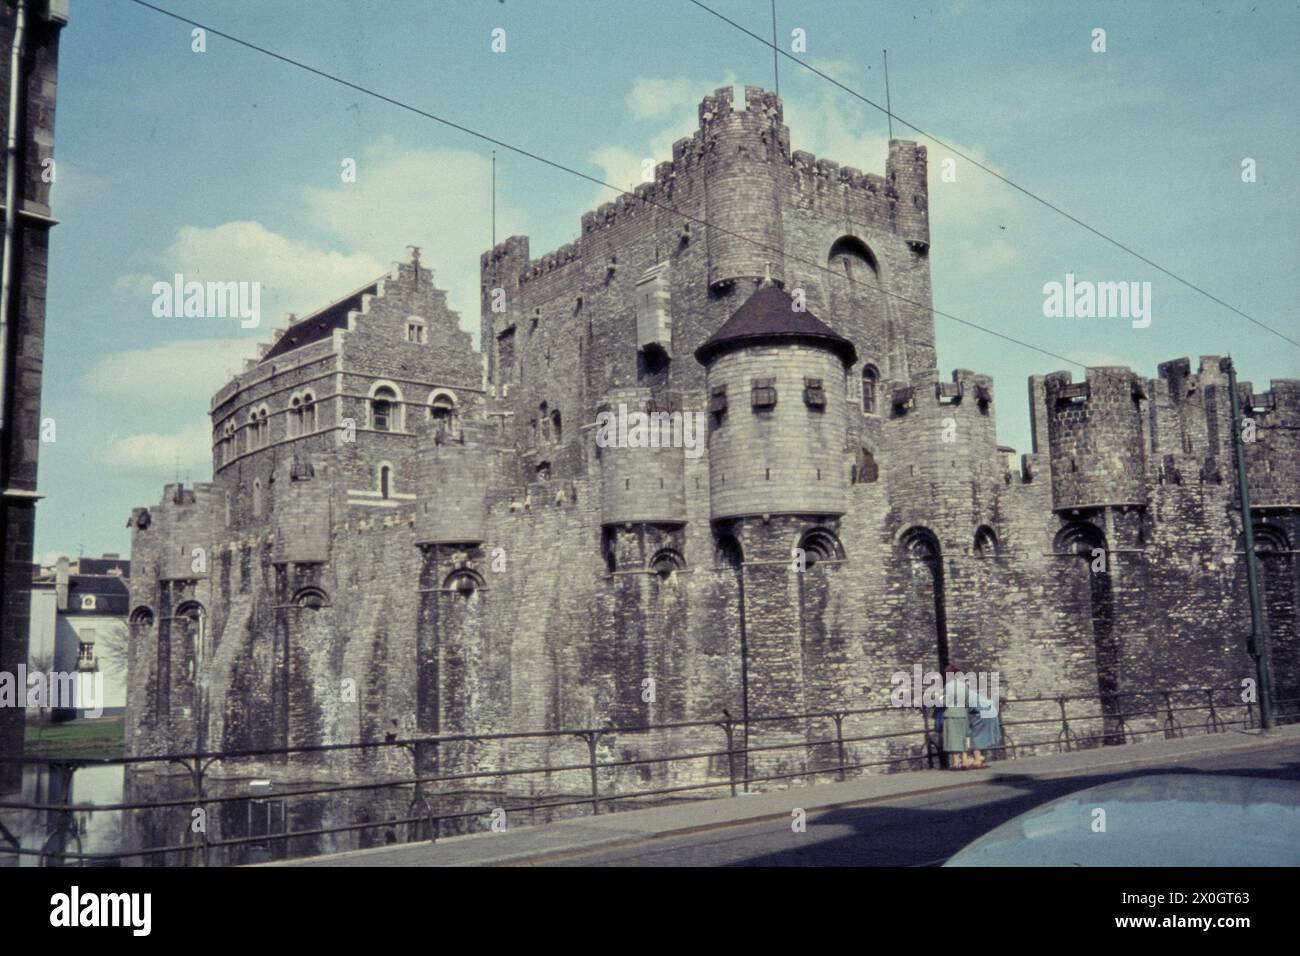 The castle of the Count of Flanders Gravensteen (Gravenstein) in Ghent, Belgium. [automated translation] Stock Photo